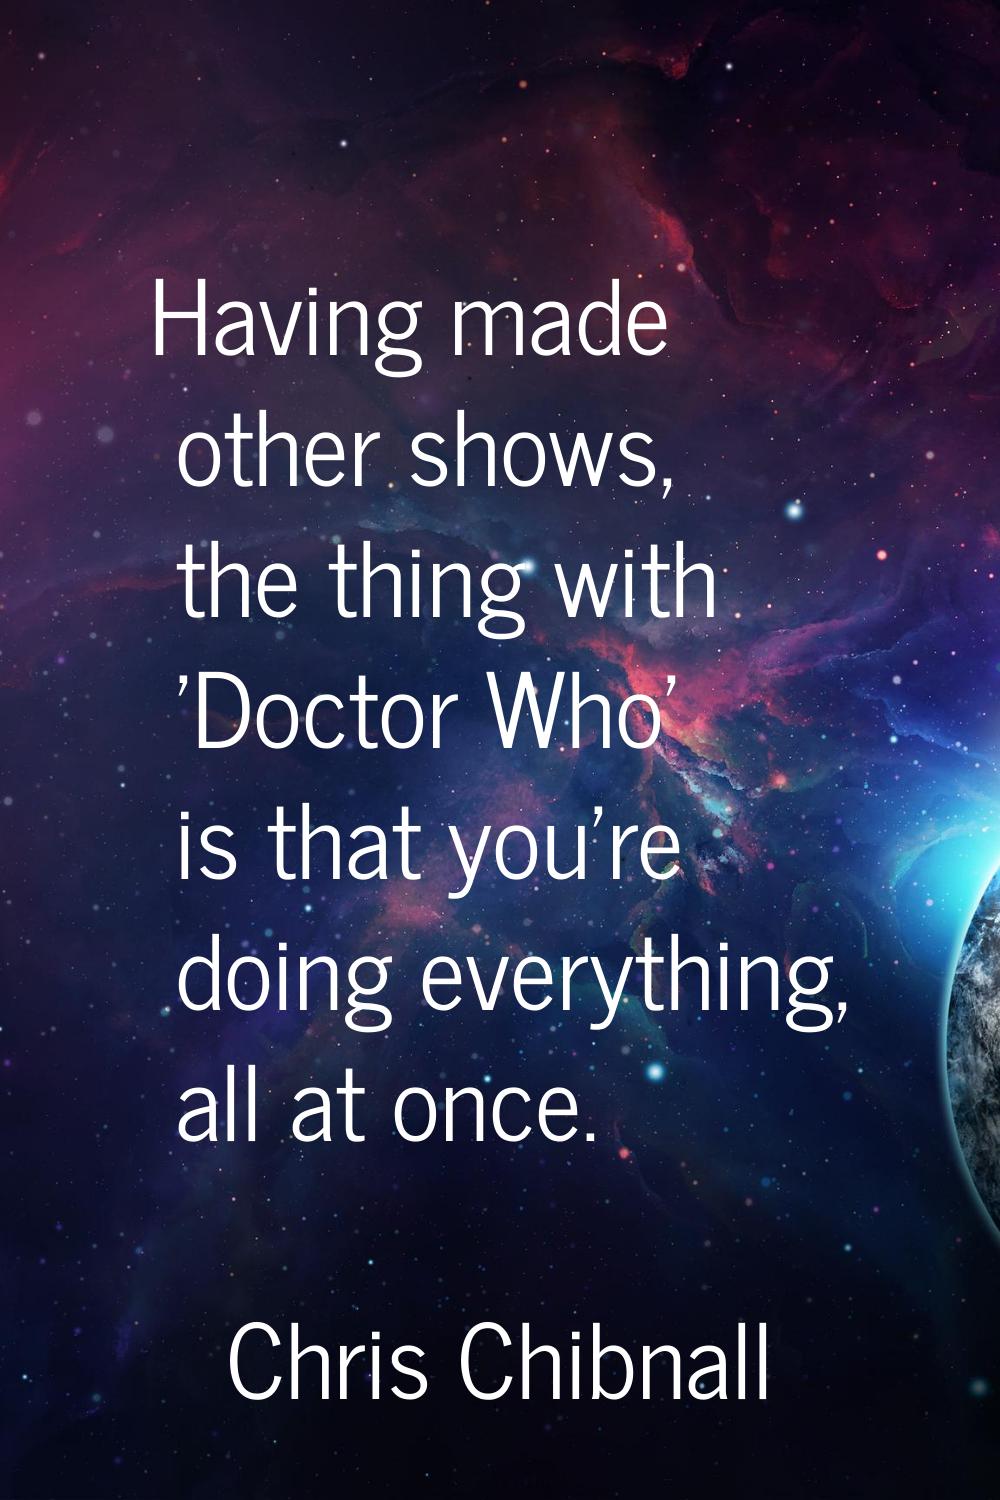 Having made other shows, the thing with 'Doctor Who' is that you're doing everything, all at once.